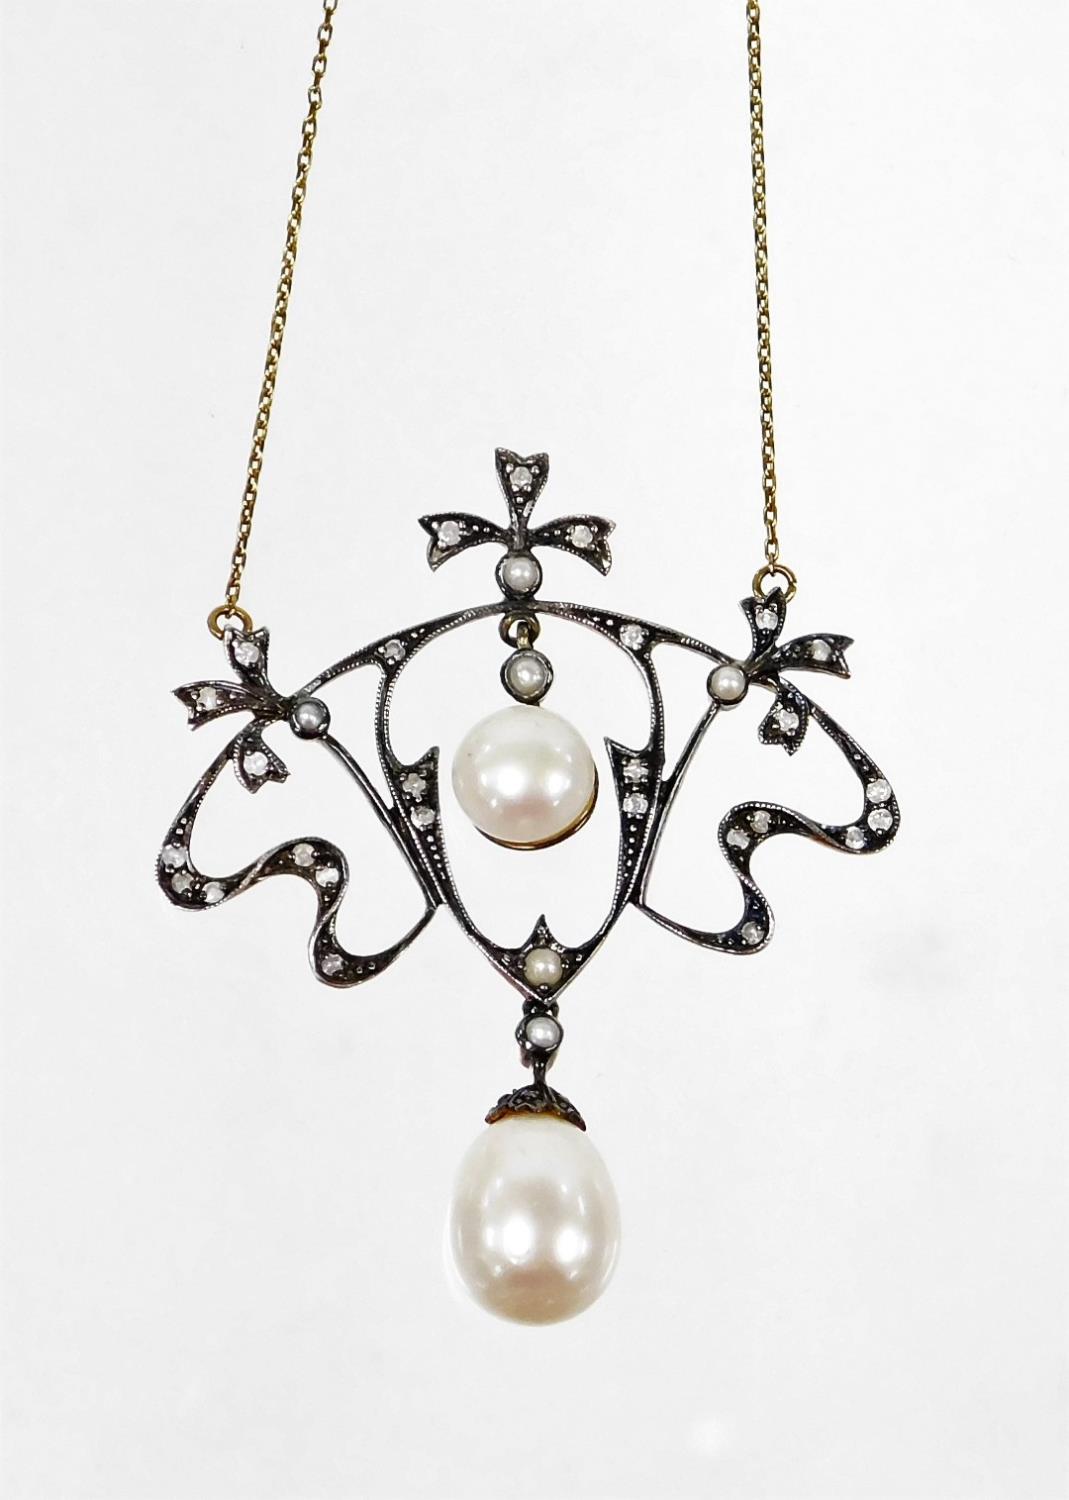 An ornate diamond and pearl necklace, in Belle Epoque style with bows and sprays, set with tiny - Image 2 of 3